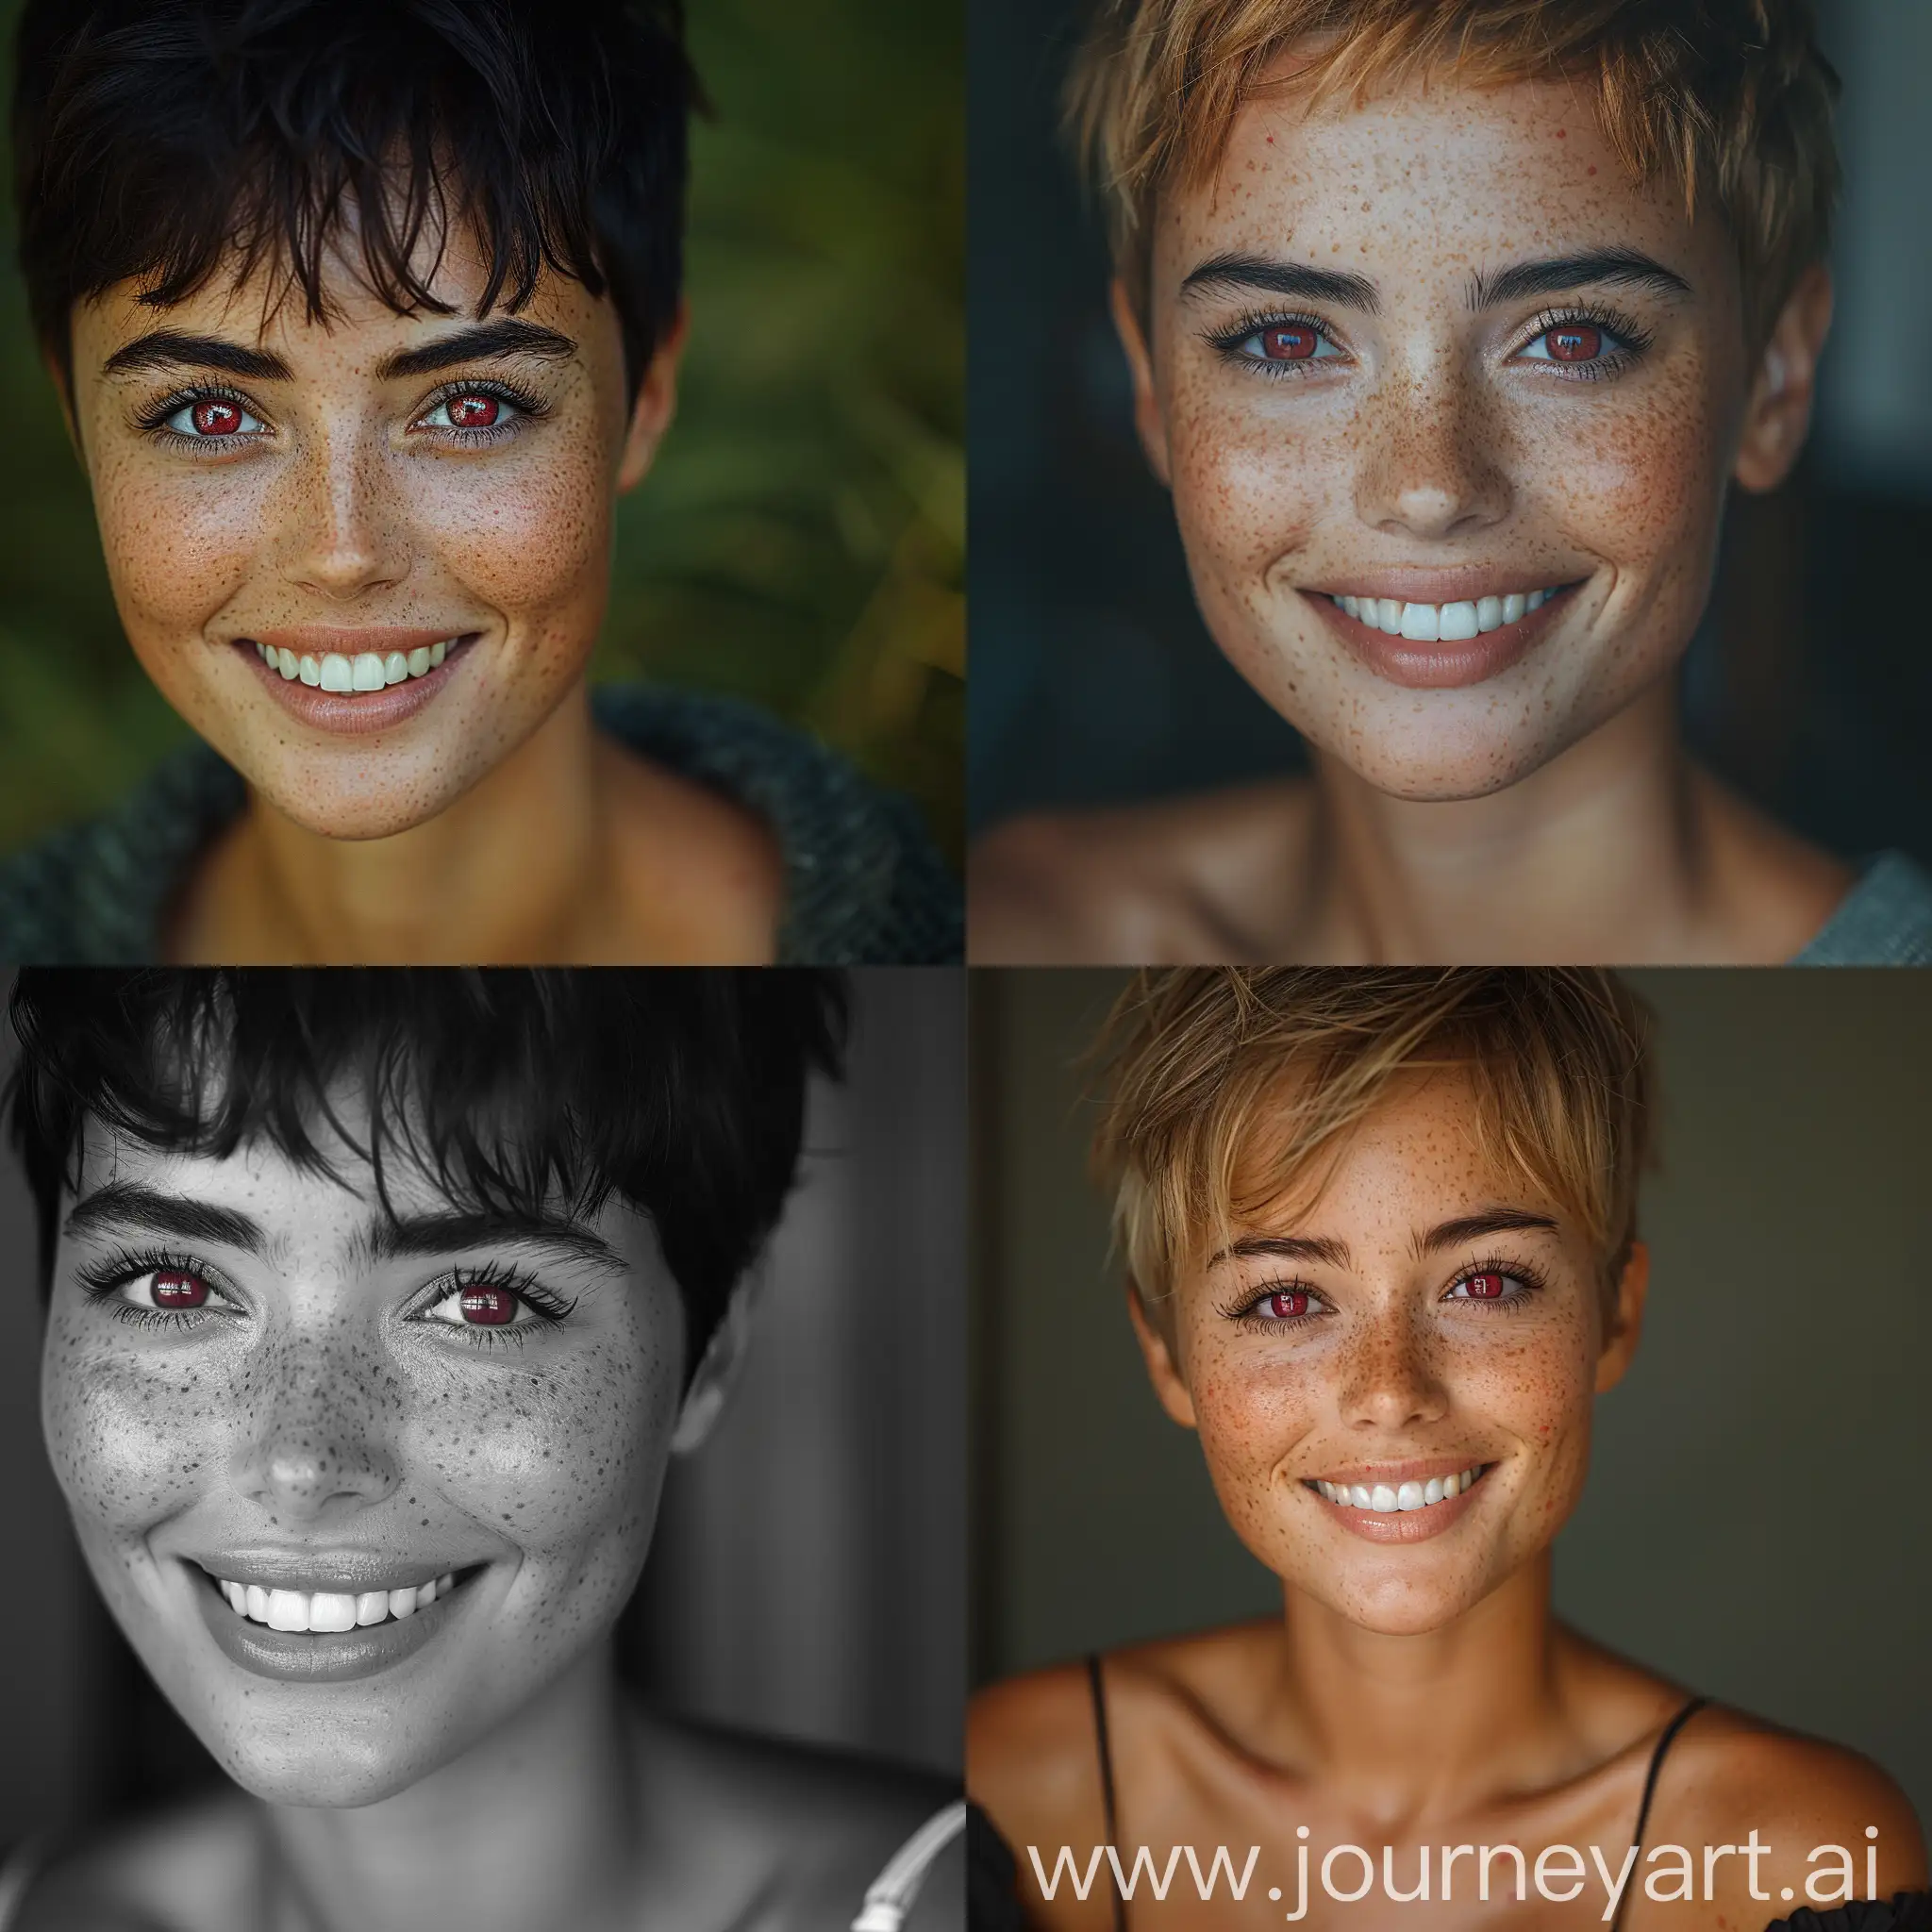 Portrait-of-a-Freckled-Lady-with-Ruby-Eyes-and-a-Big-Smile